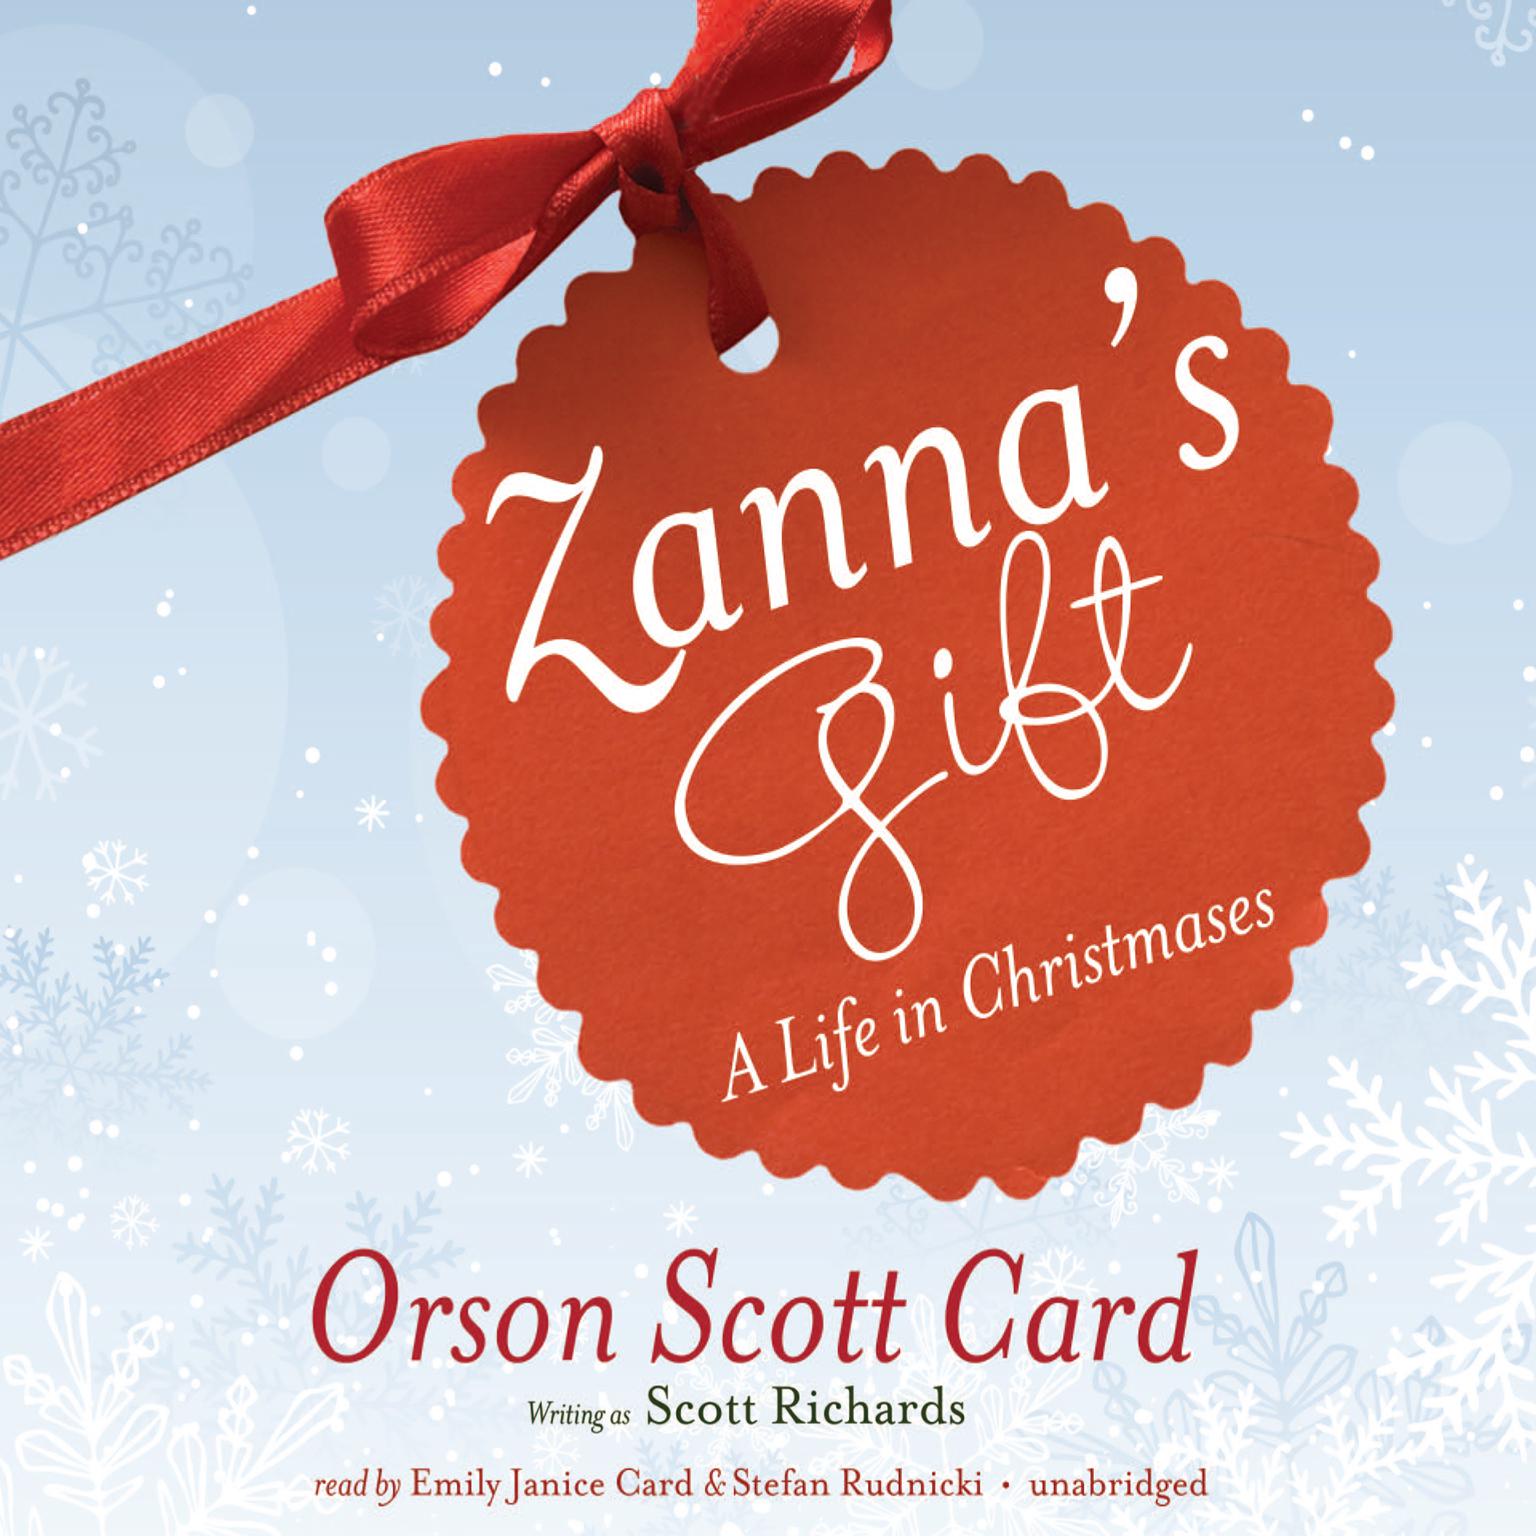 Zanna’s Gift: A Life in Christmases Audiobook, by Orson Scott Card